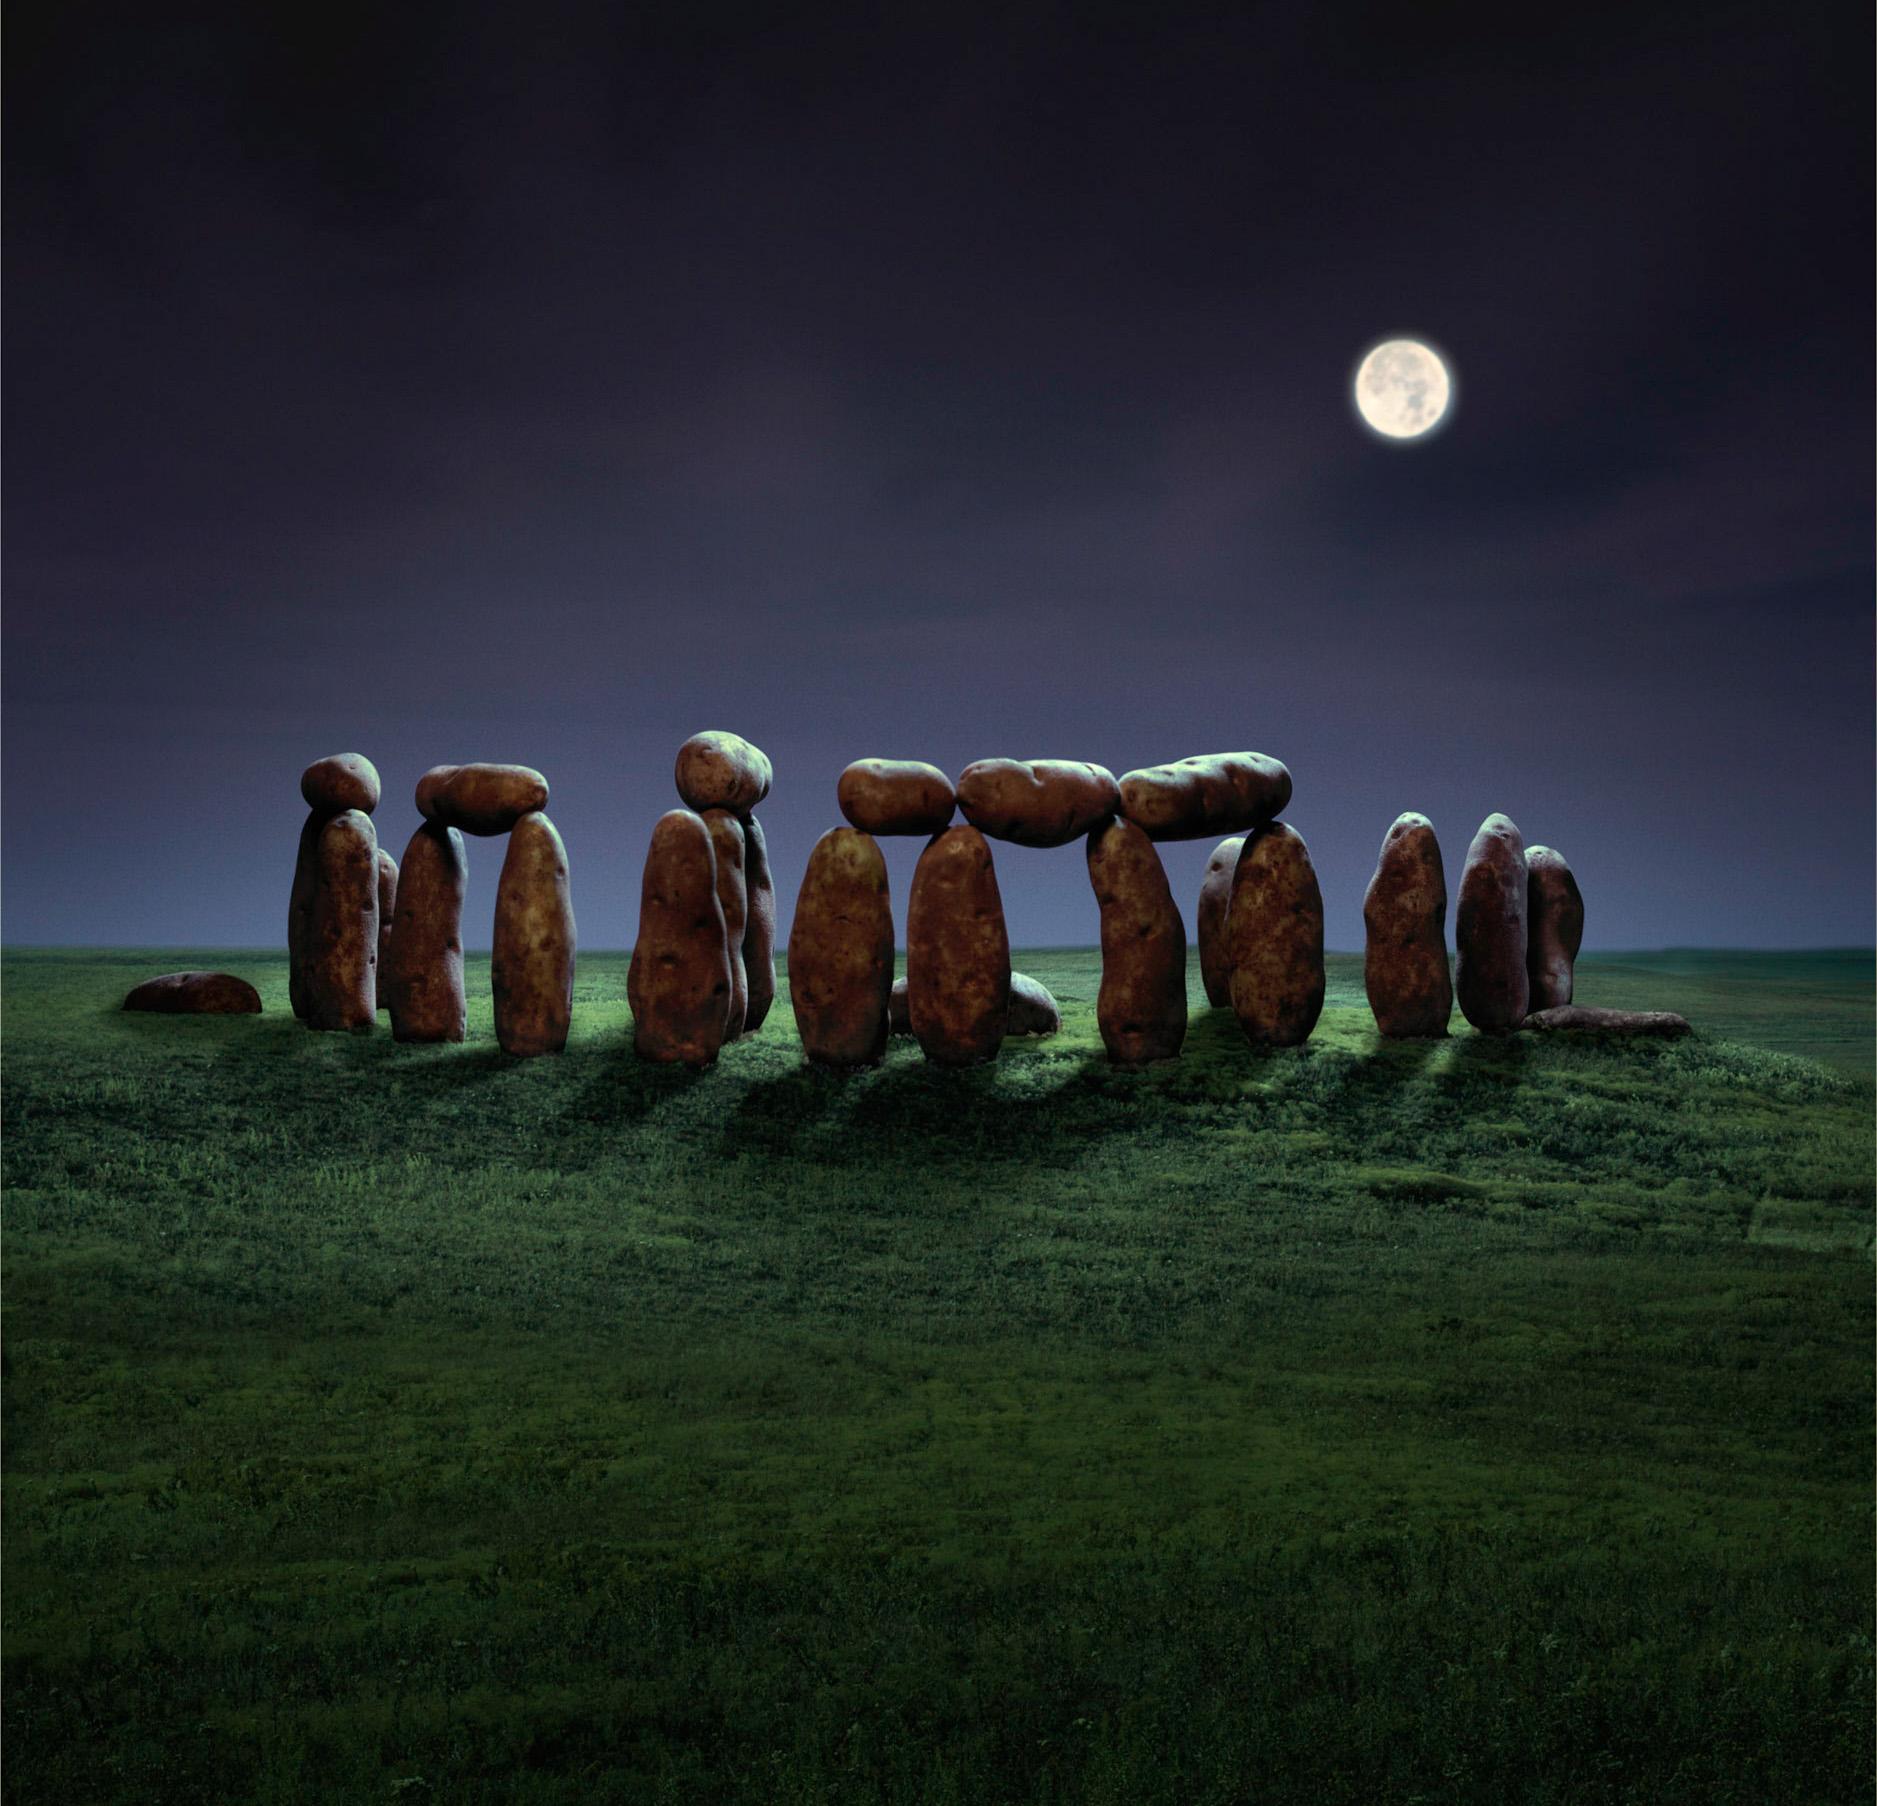 Spudhenge - Photograph by Nick Vedros